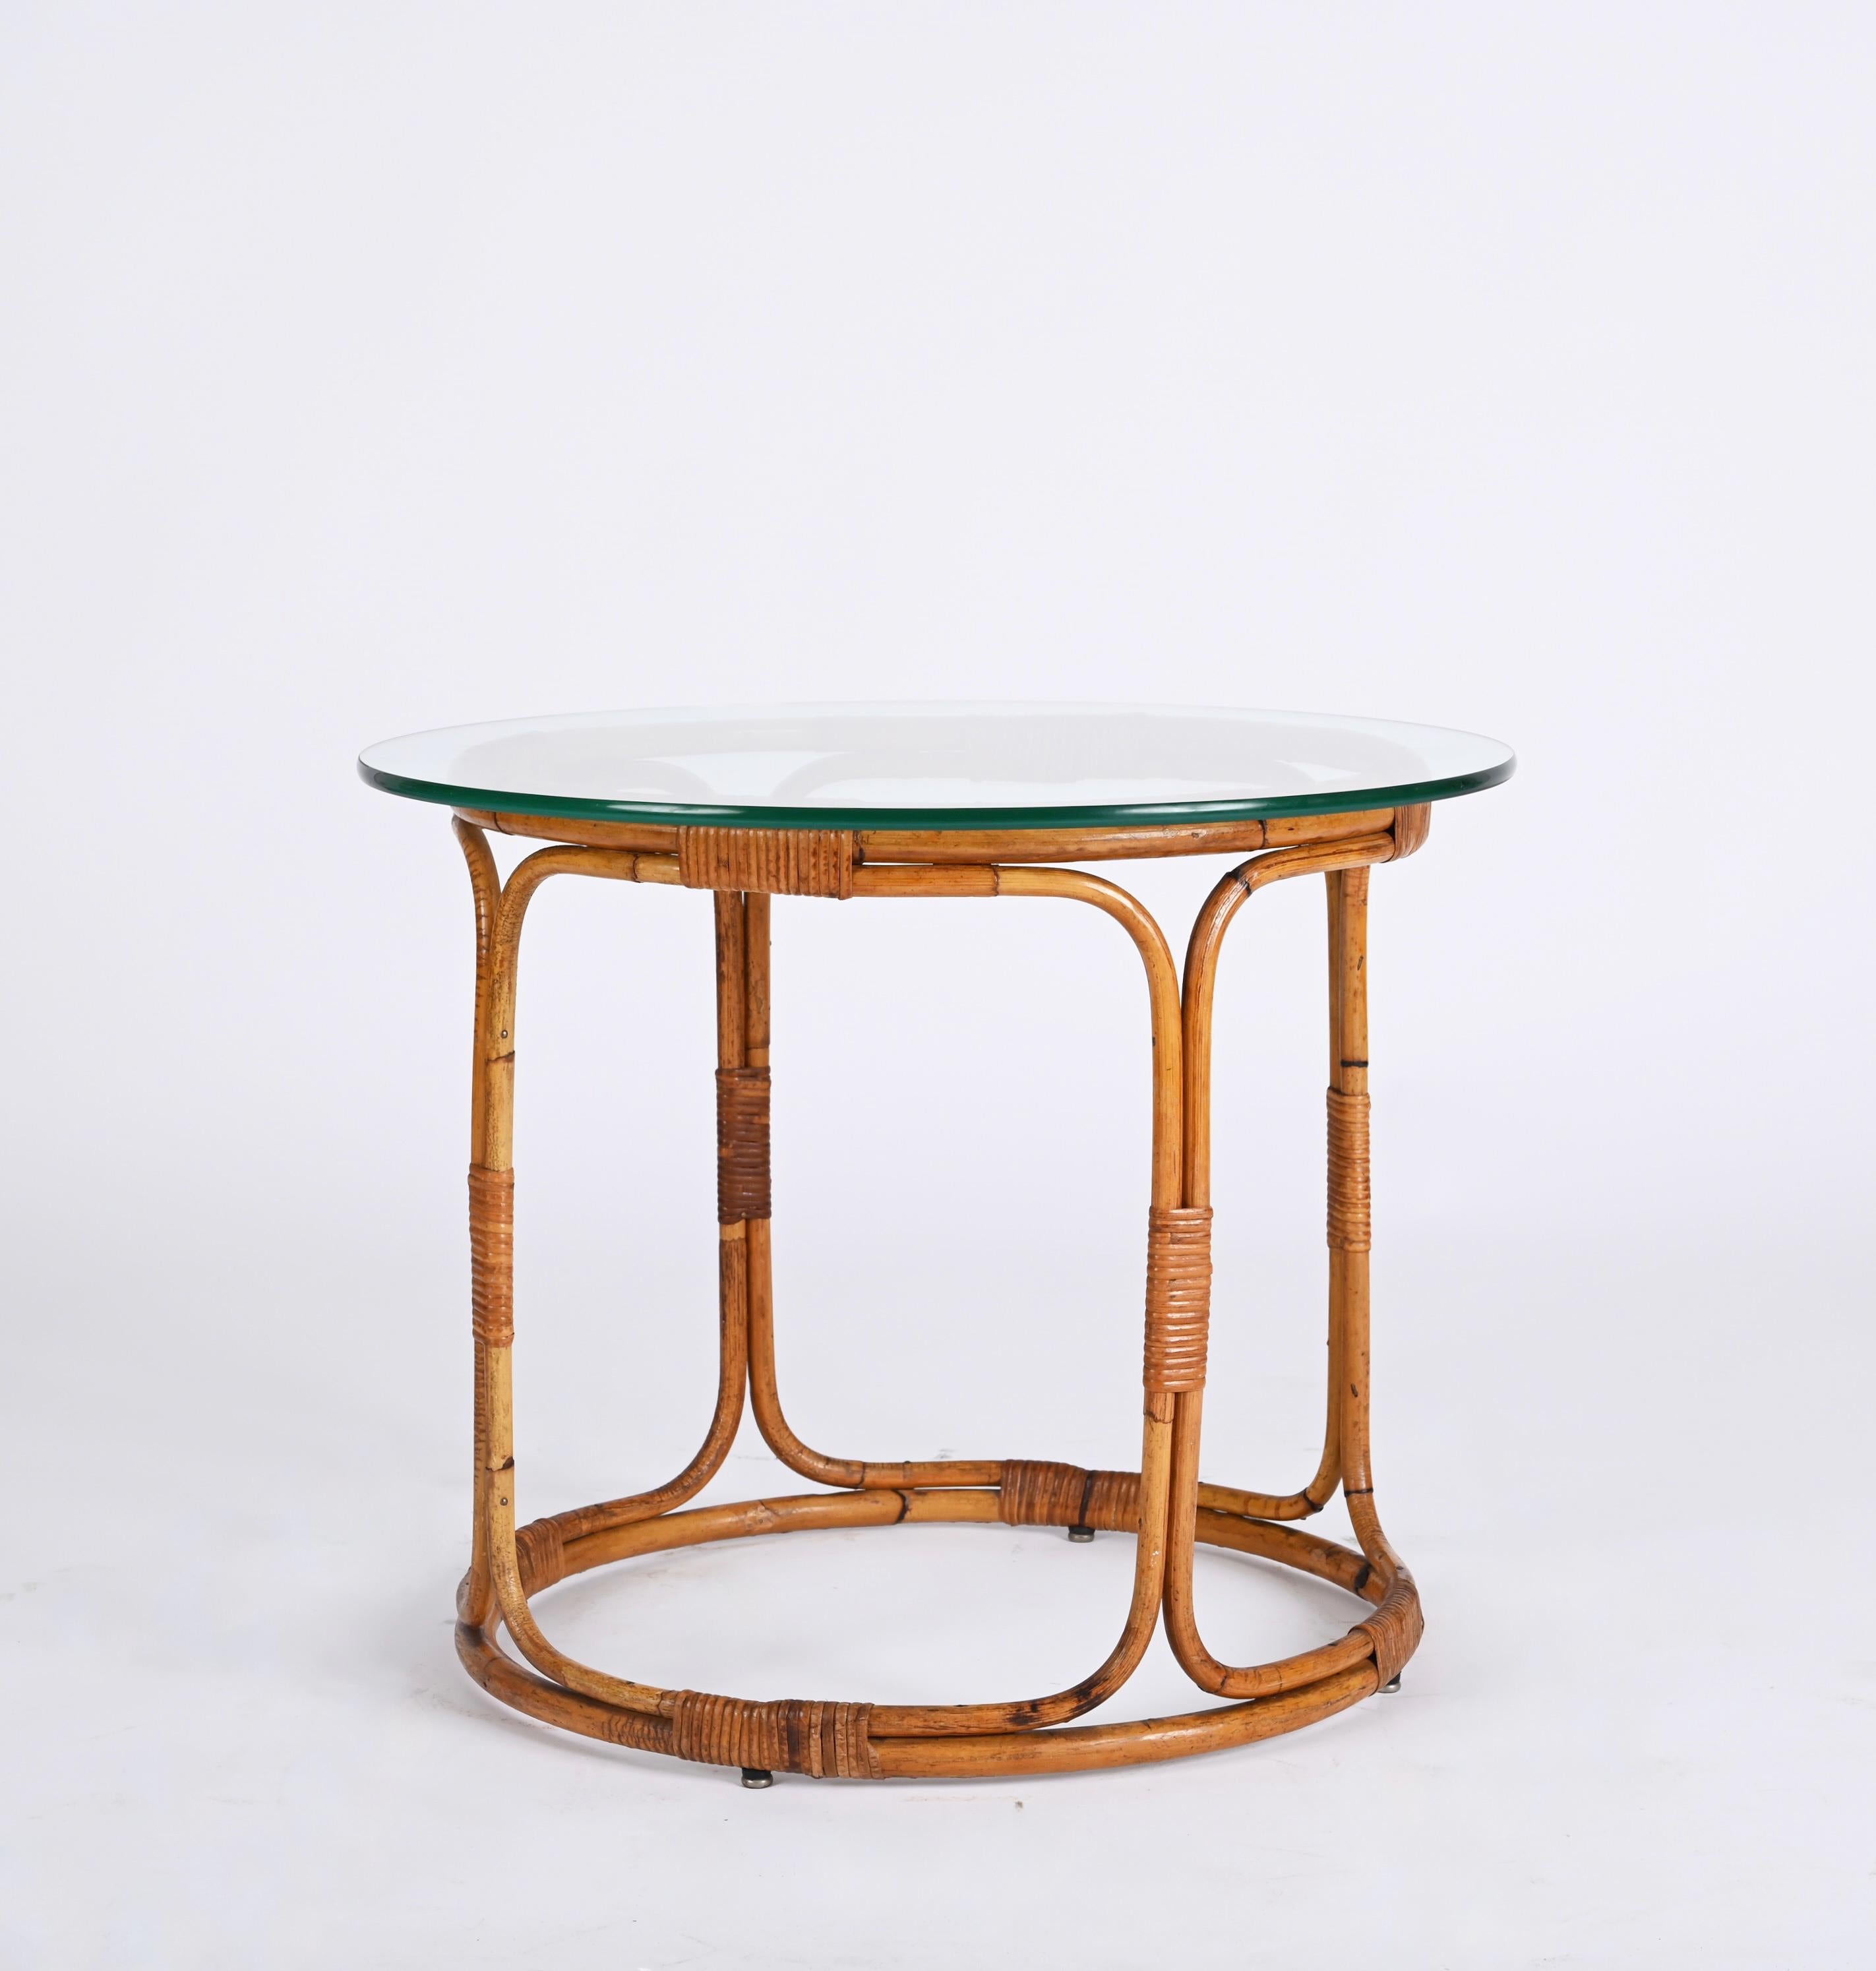 Stunning midcentury rounded coffee table in rattan and bamboo with glass and metal feet. This wonderful bamboo and rattan coffee table was produced in Italy during the 1960s in French riviera style, following François Rivière's steps. 

This item